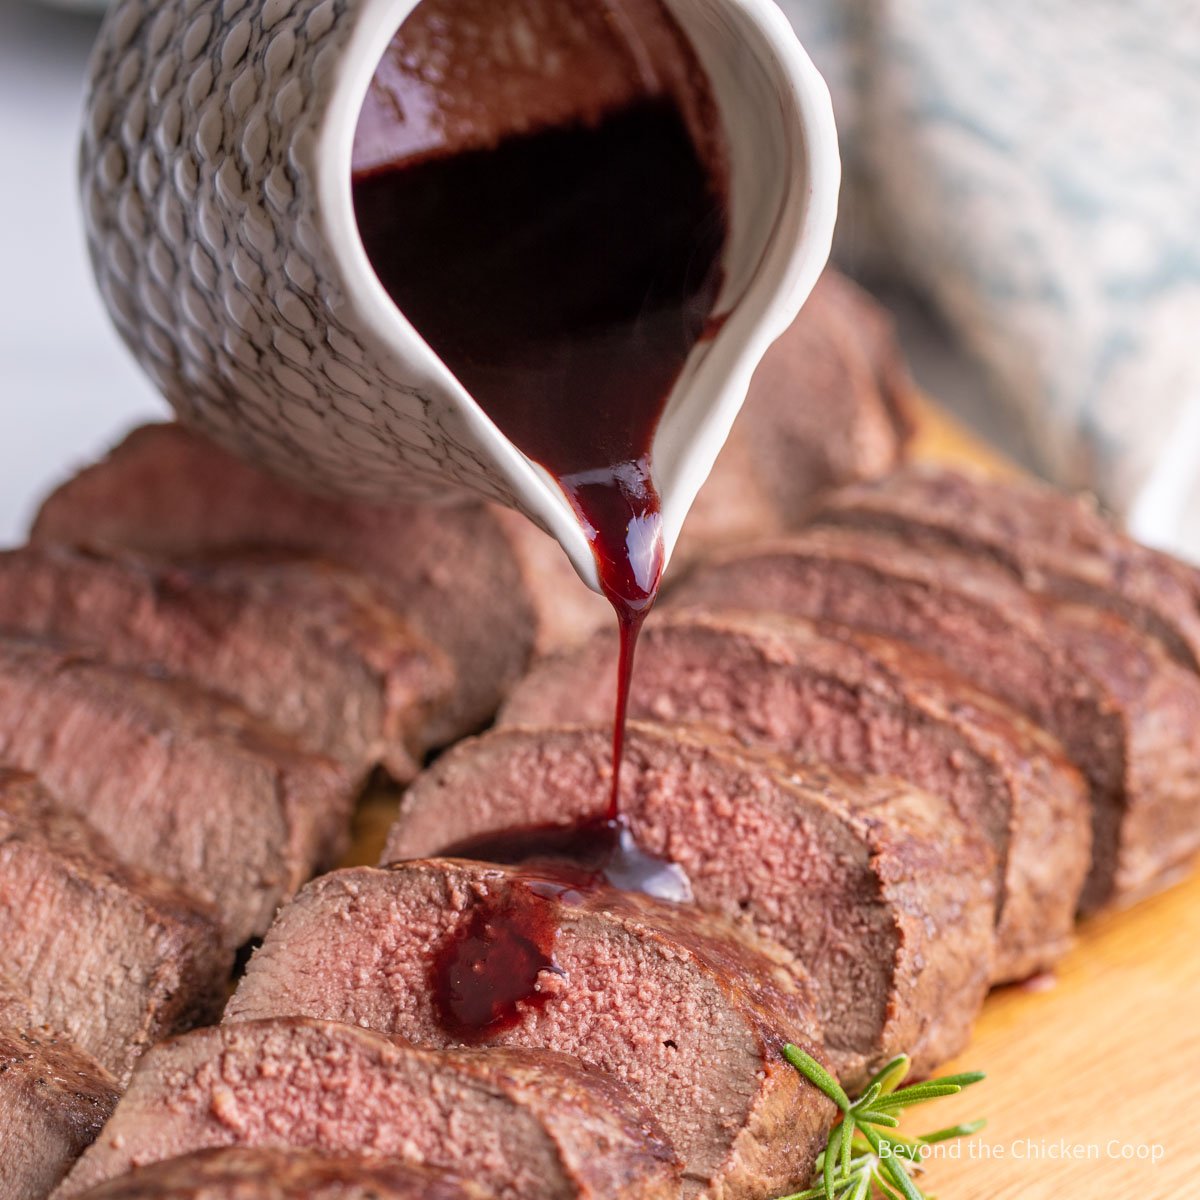 A red wine sauce being poured over sliced red meat.